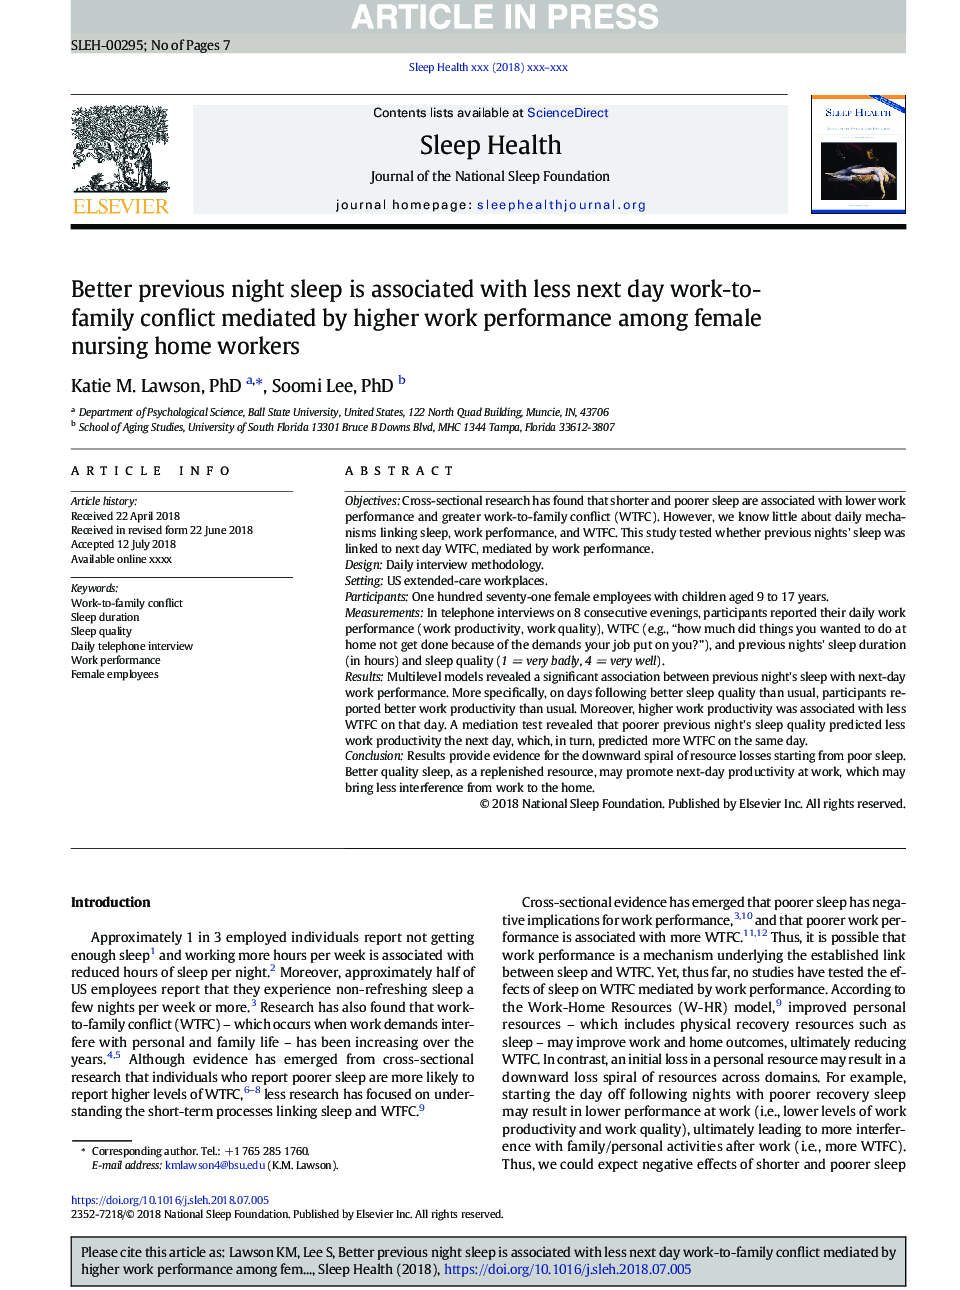 Better previous night sleep is associated with less next day work-to-family conflict mediated by higher work performance among female nursing home workers